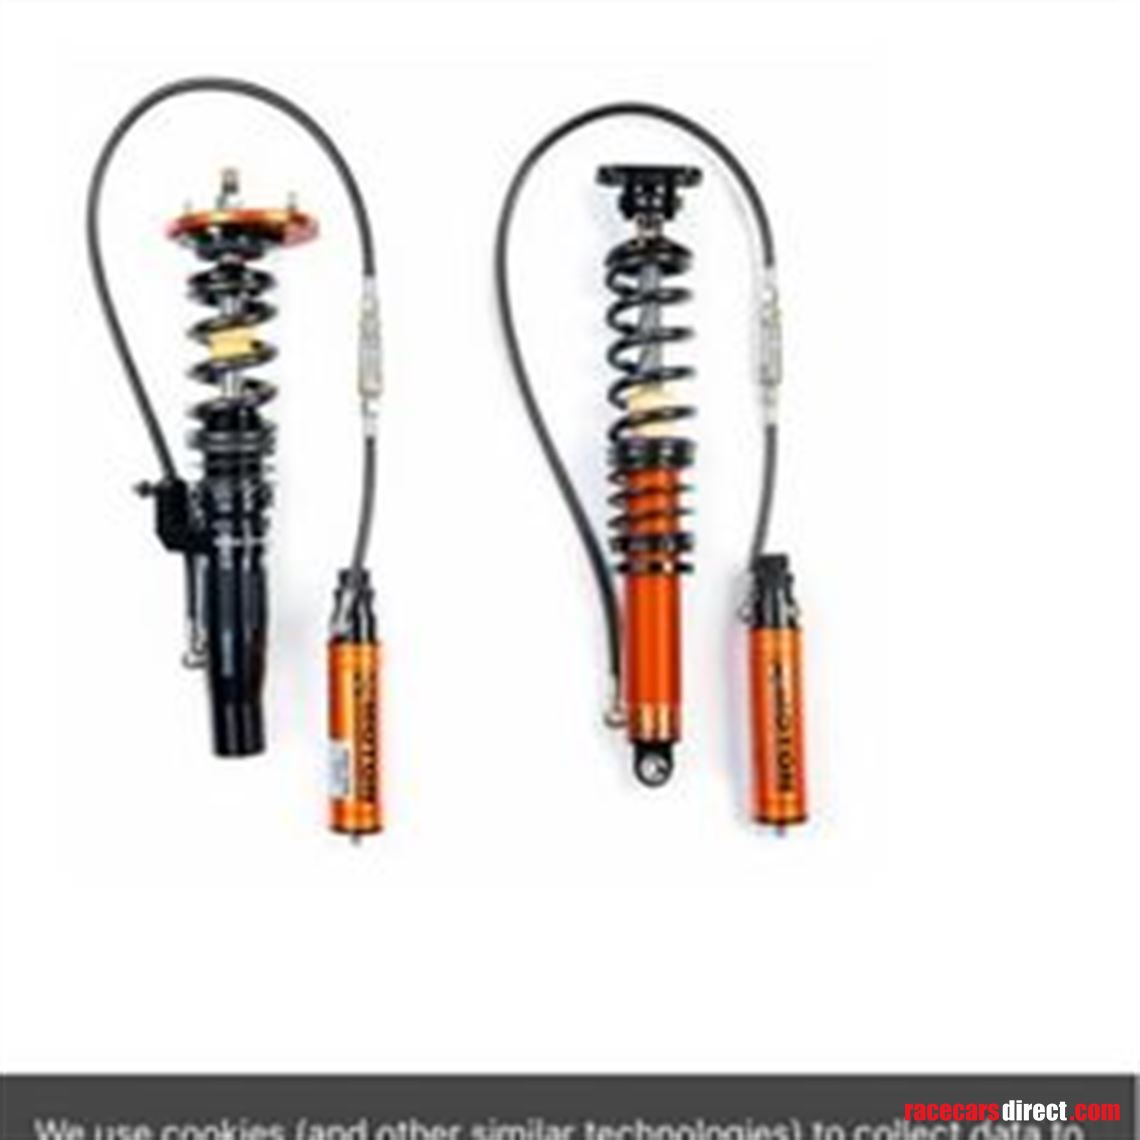 vag-moton-ast-34-way-tcr-coilovers-s3a3golf-m